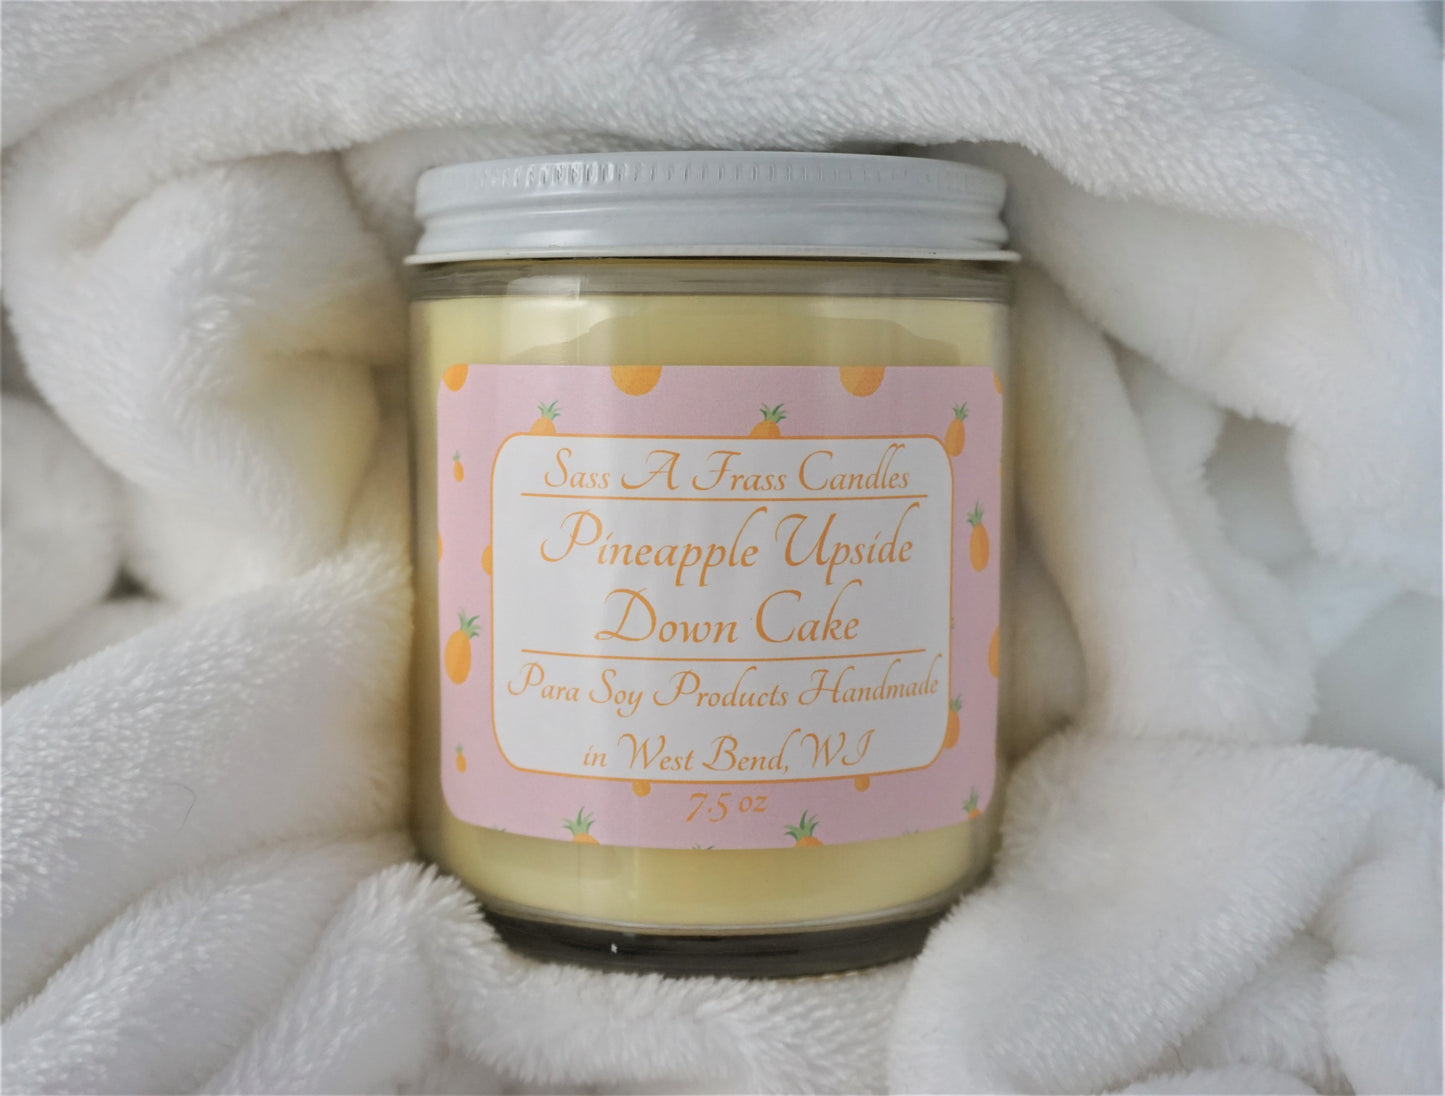 Pineapple Upside Down Cake 7.5 oz Candle